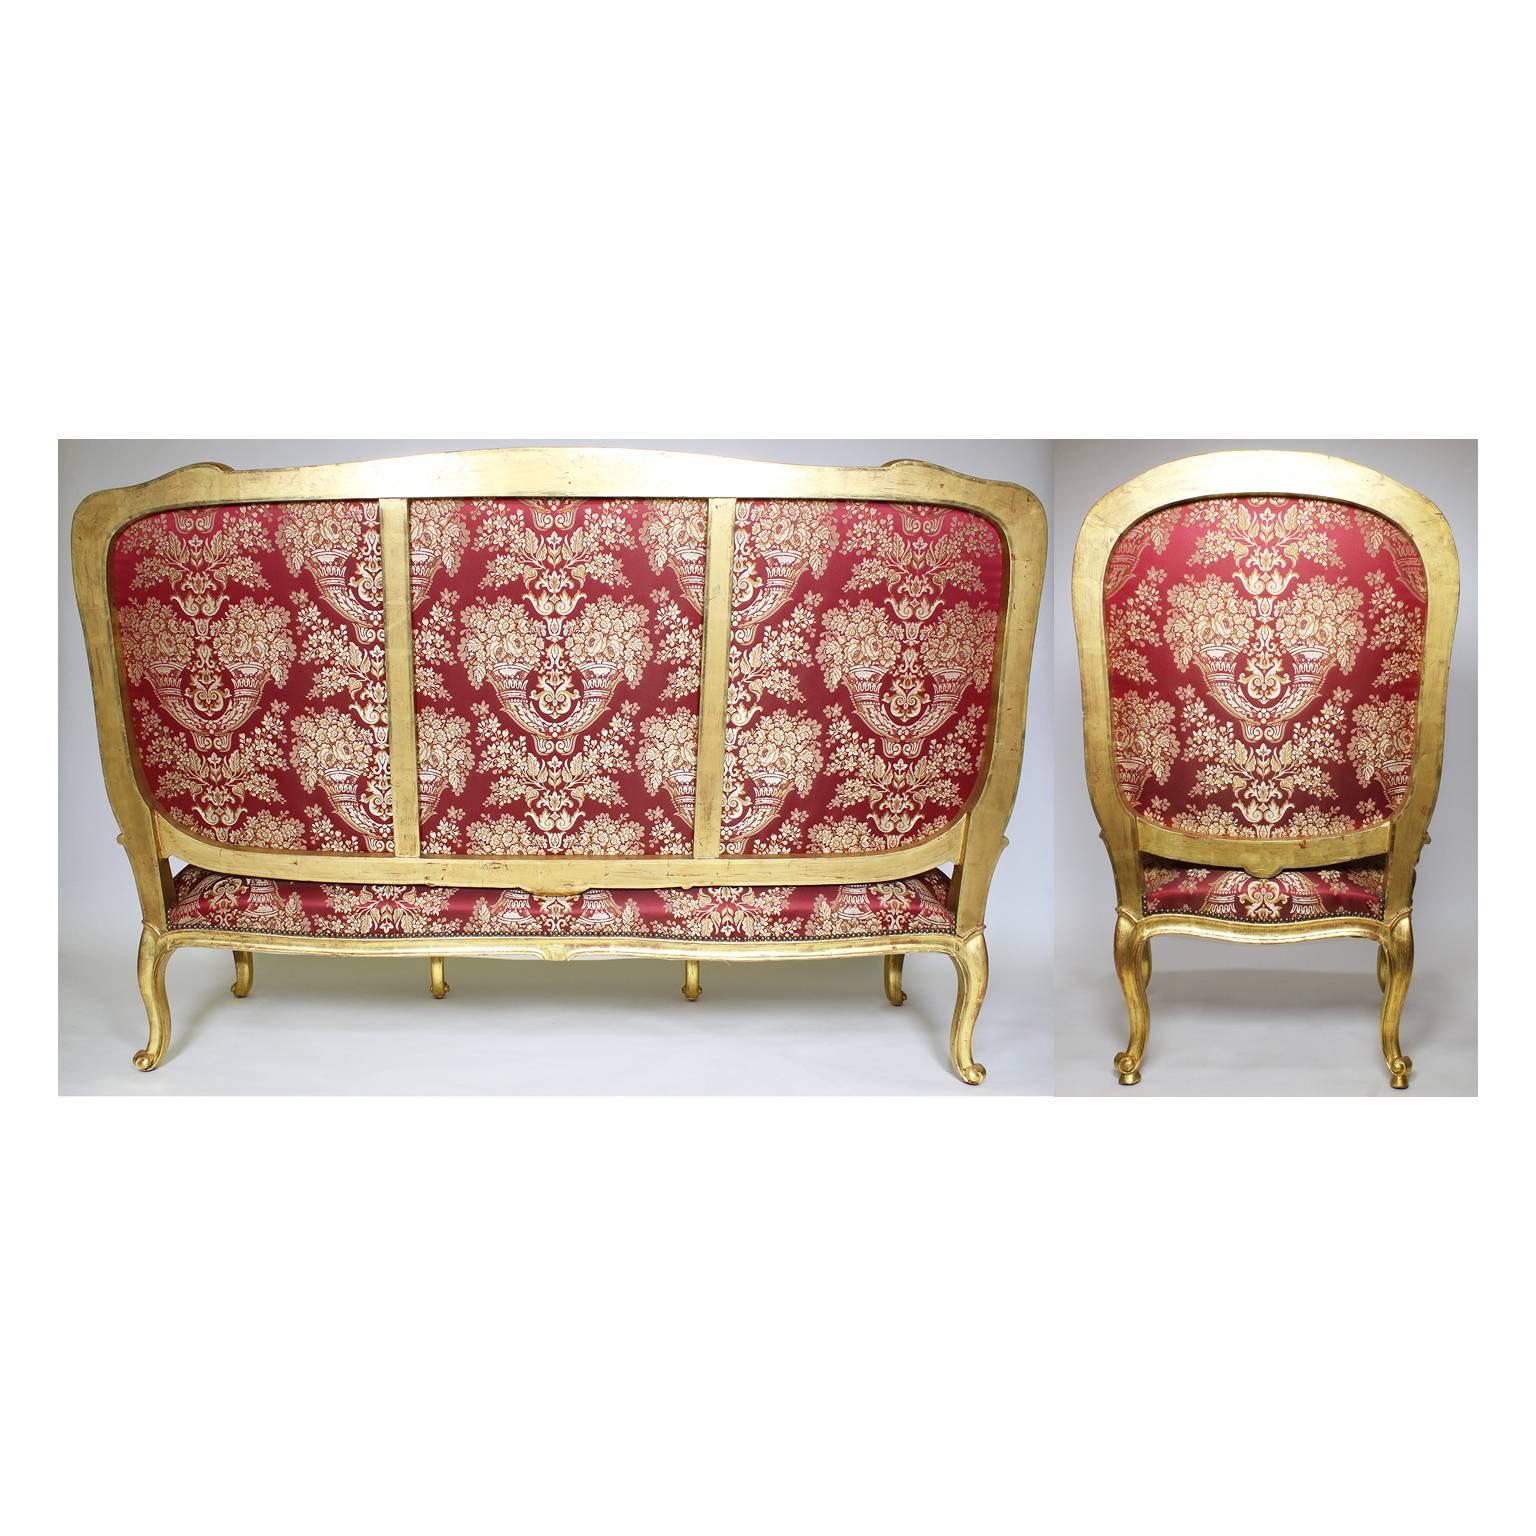 Palatial 19th Century Louis XV Style Giltwood Carved Five-Piece Salon Suite For Sale 5